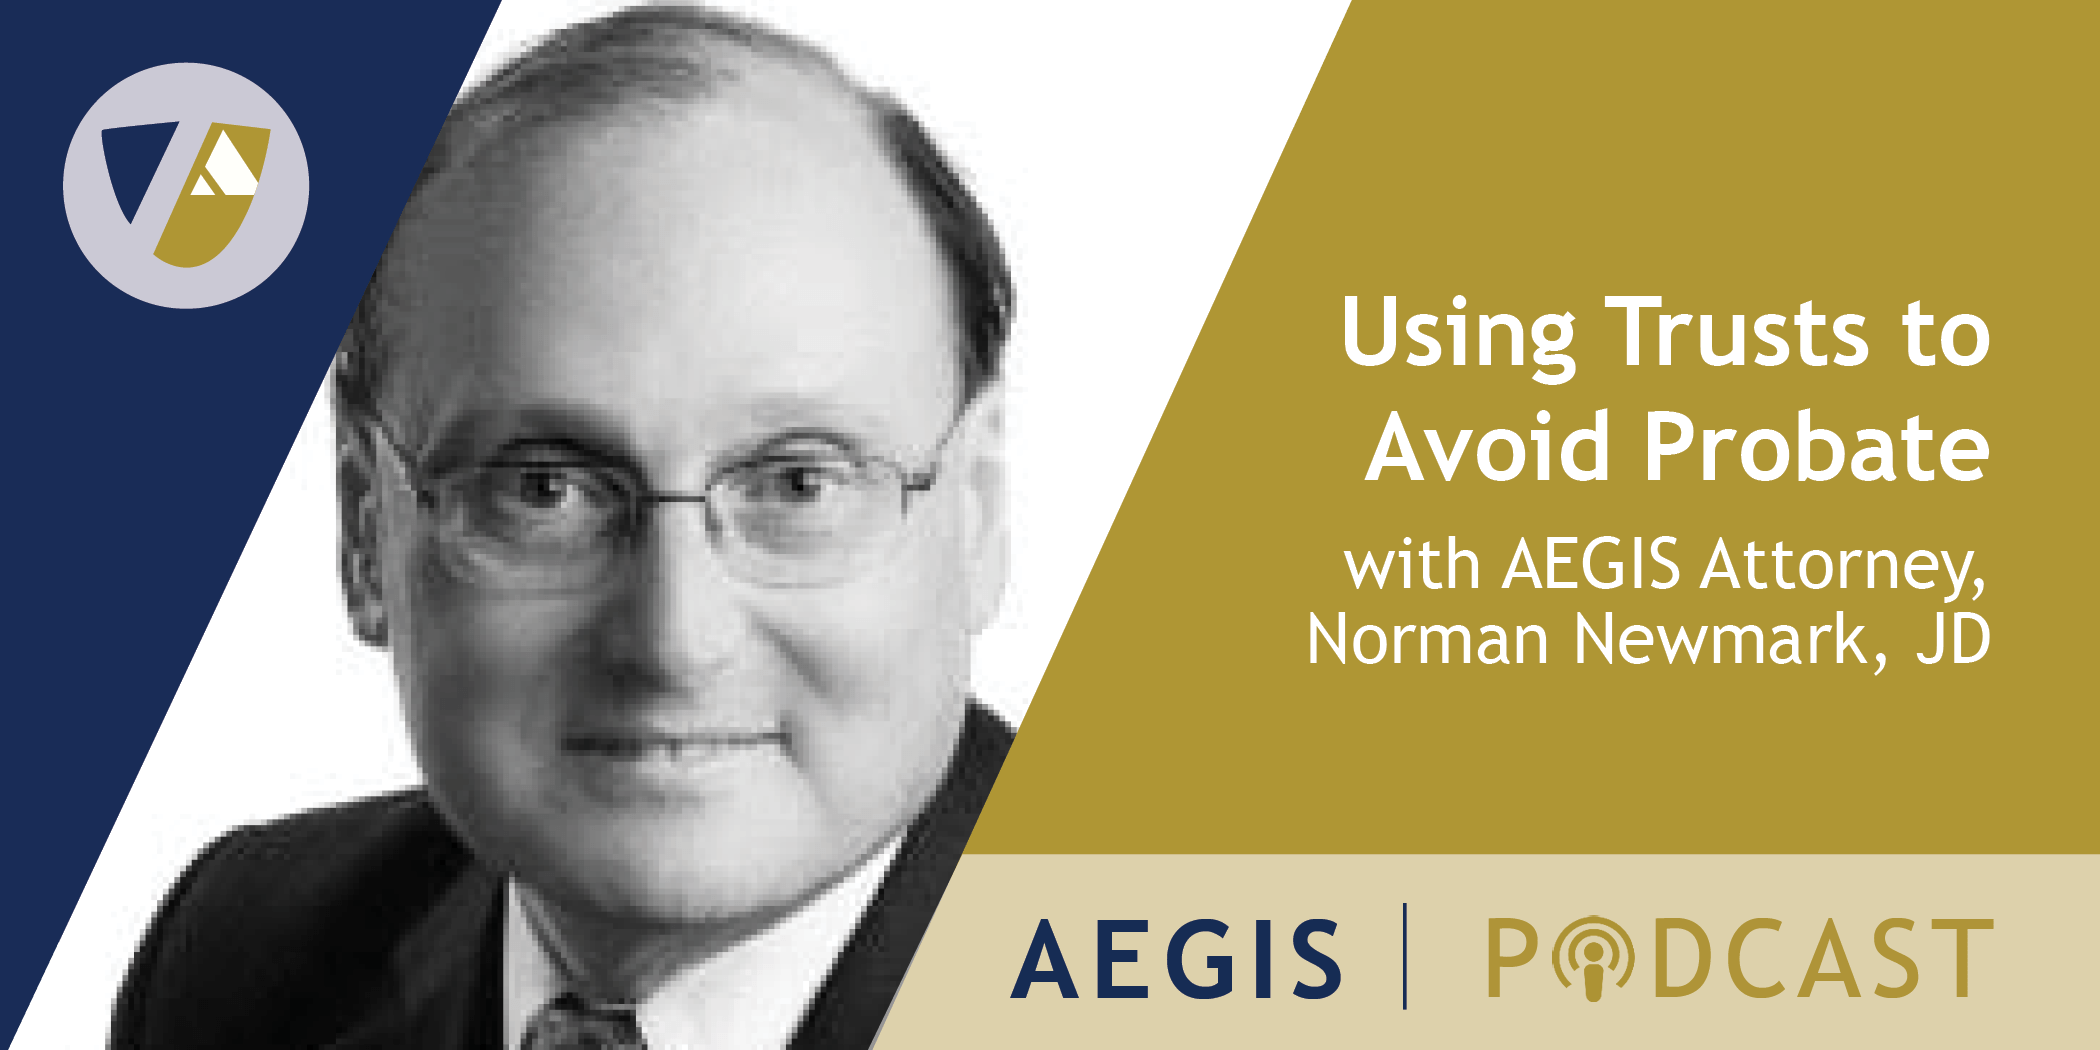 The AEGIS Podcast: Interview with Norman Newmark, AEGIS Attorney: Using Trusts to Avoid Probate